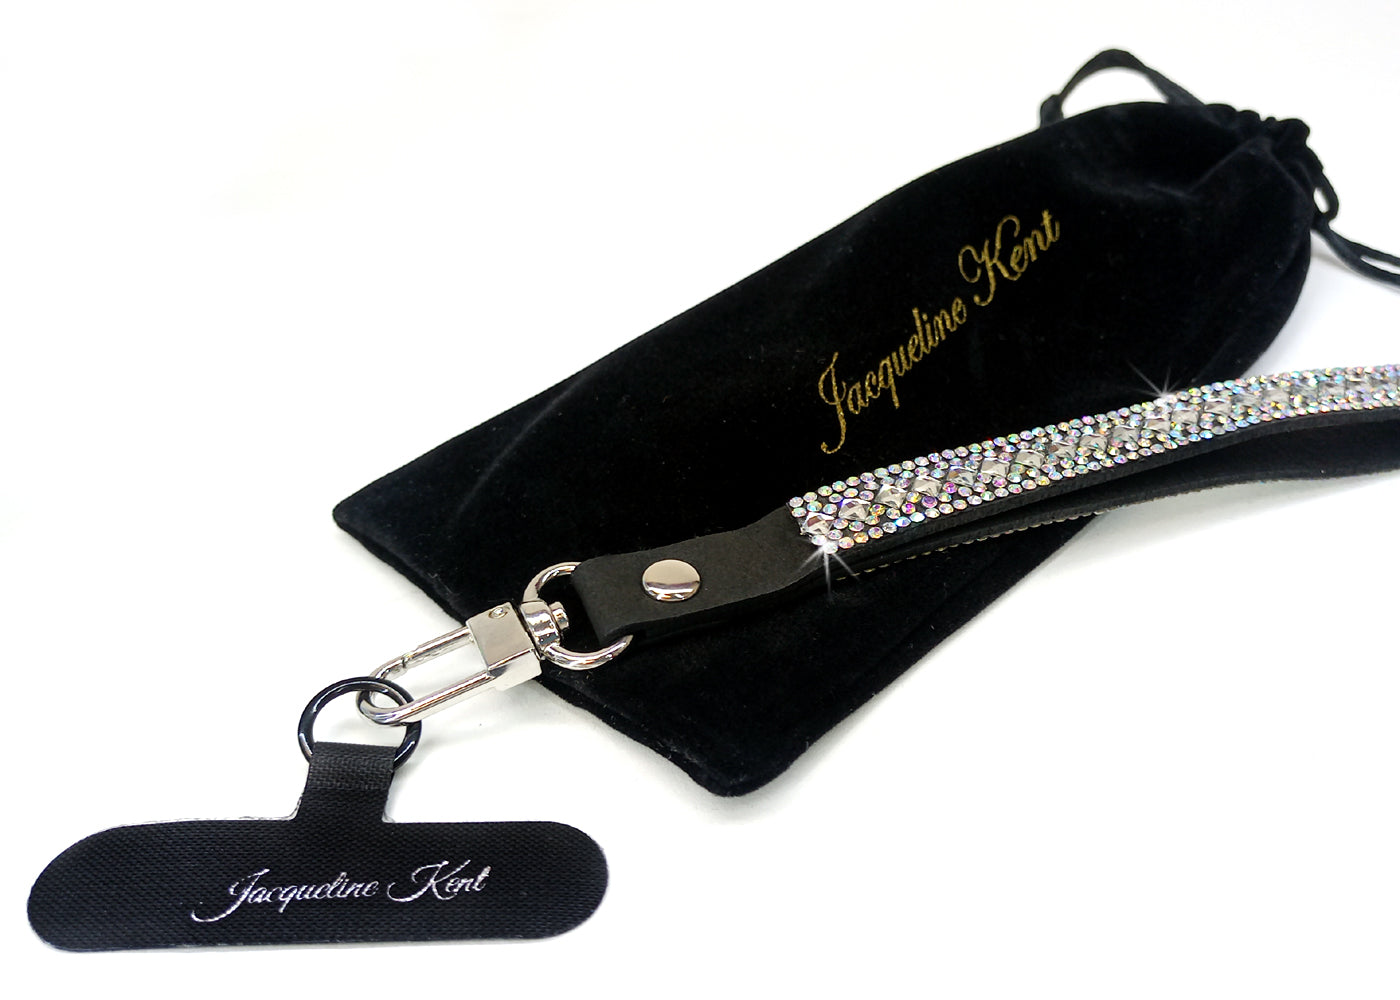 Jacqueline Kent Cell Phone Wrist Strap – Crafted Decor